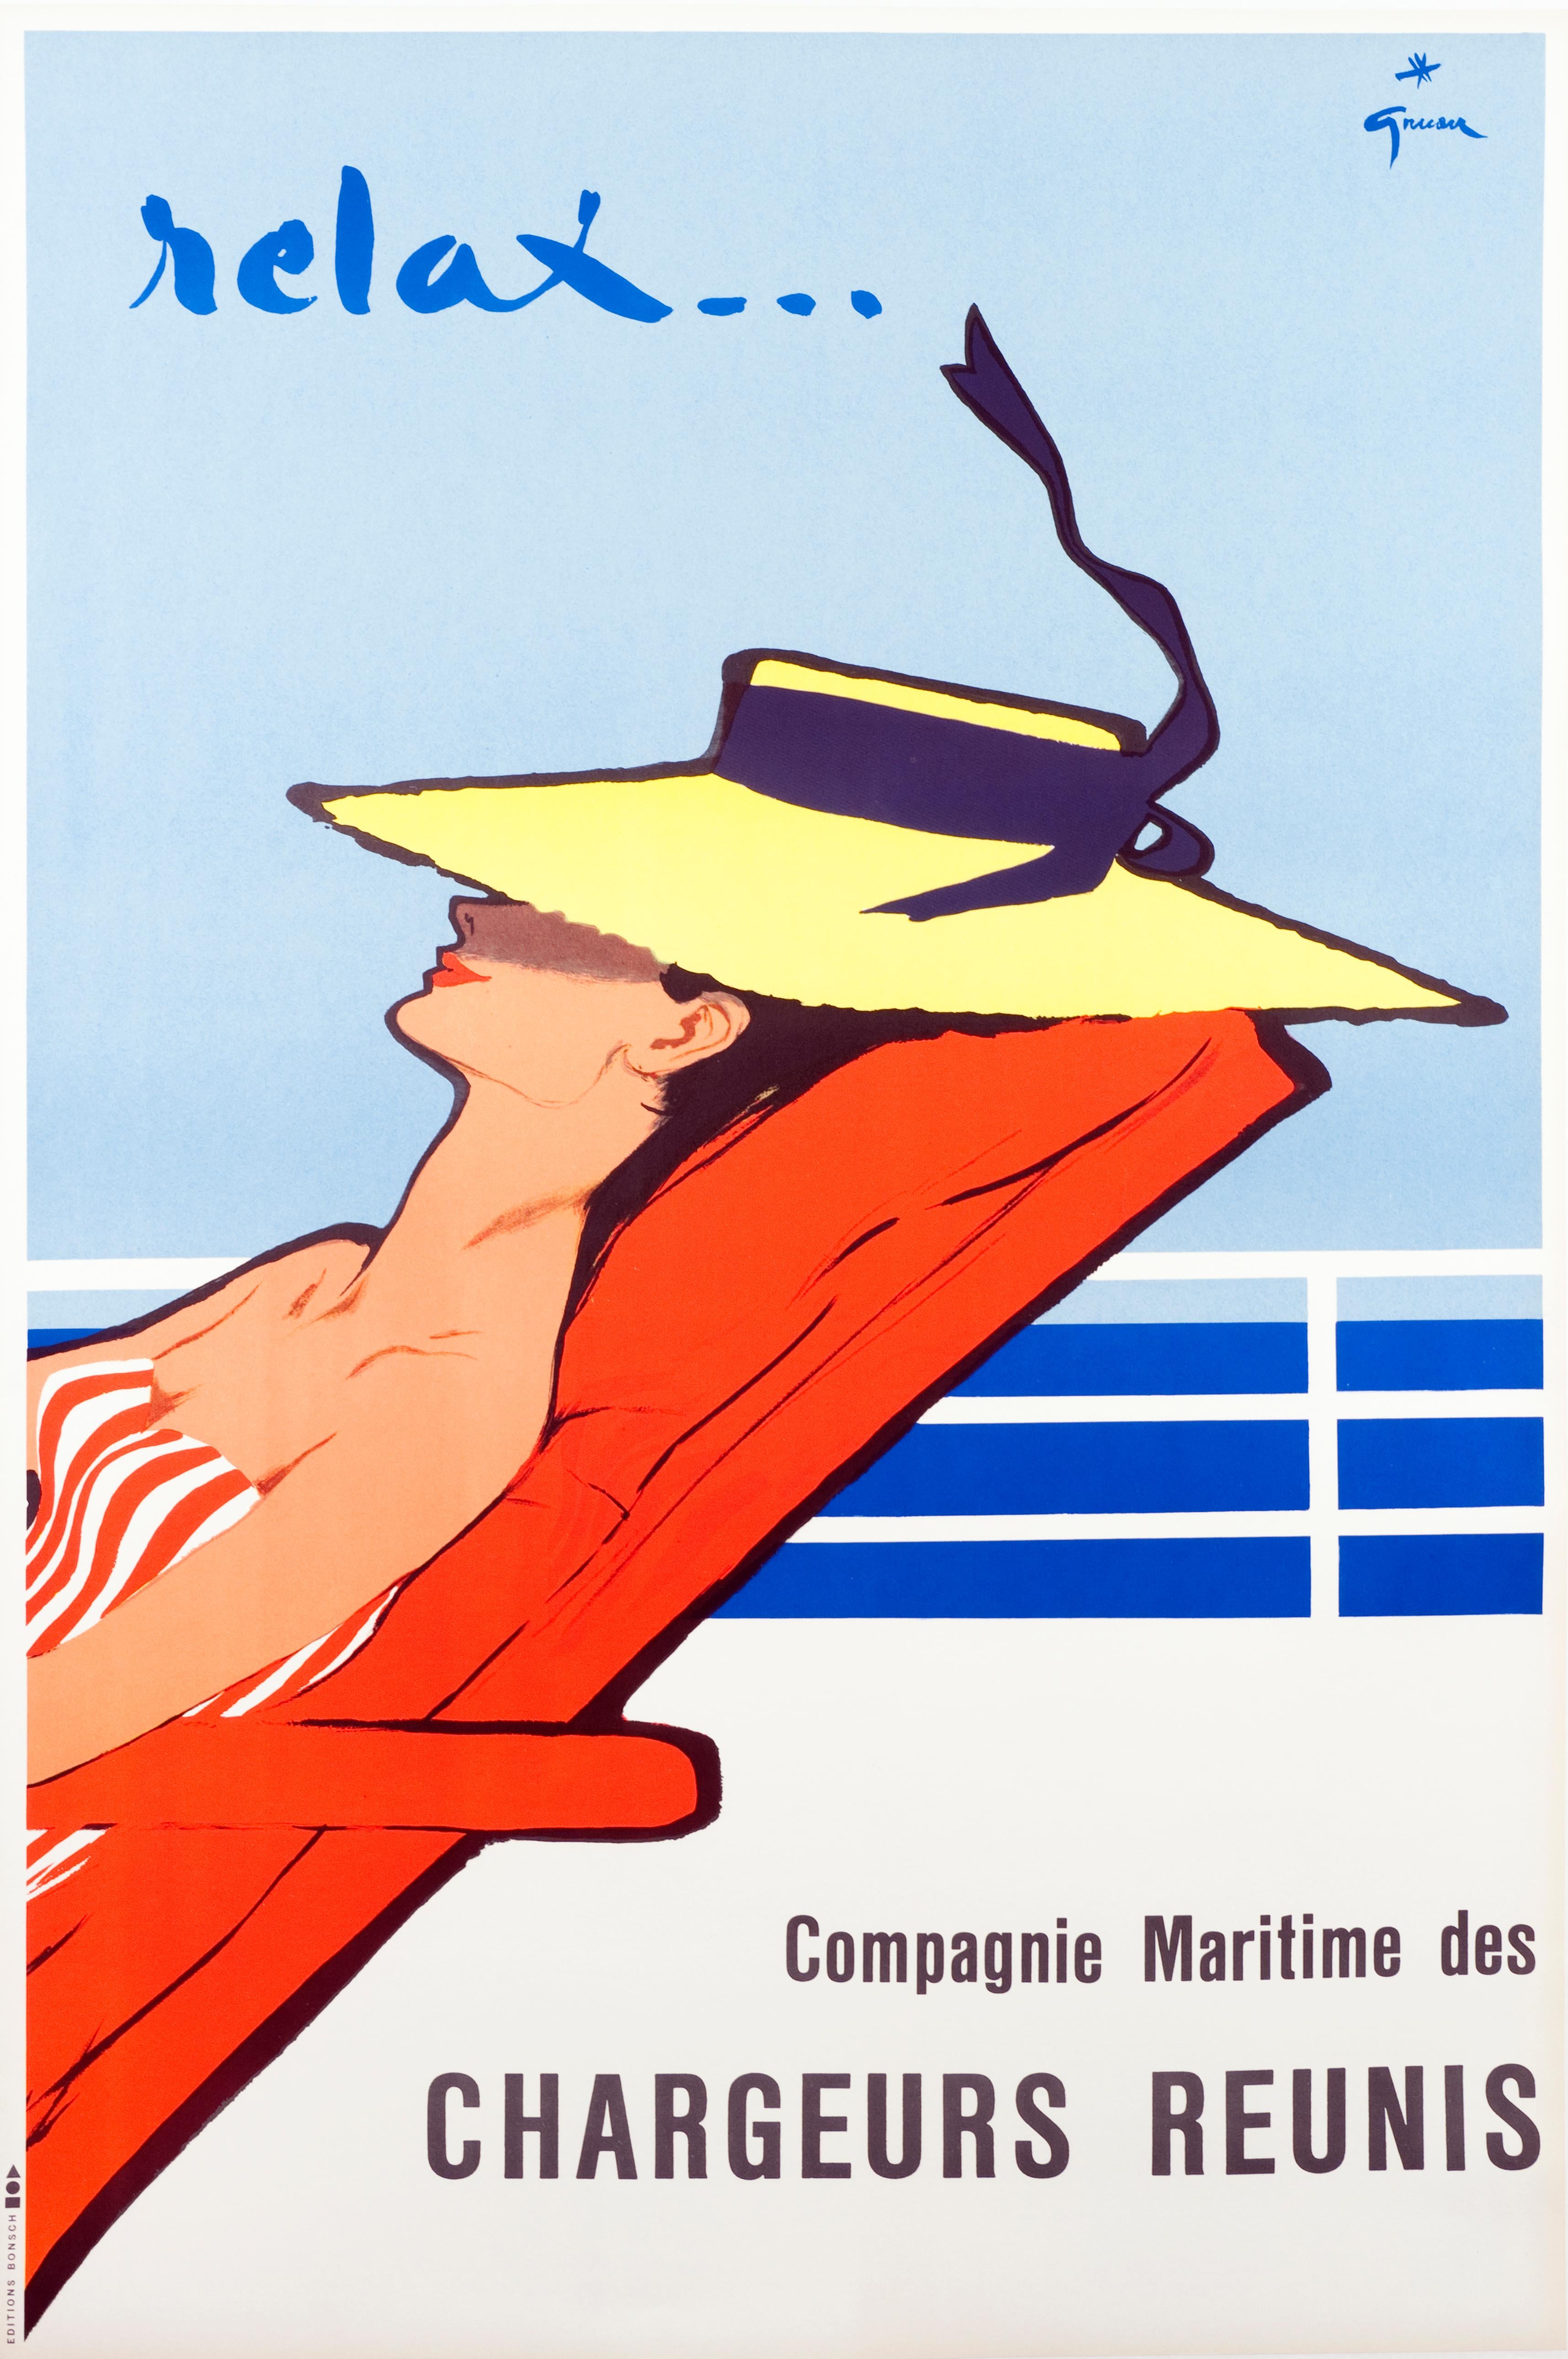 "Relax" Original Vintage French Travel Poster